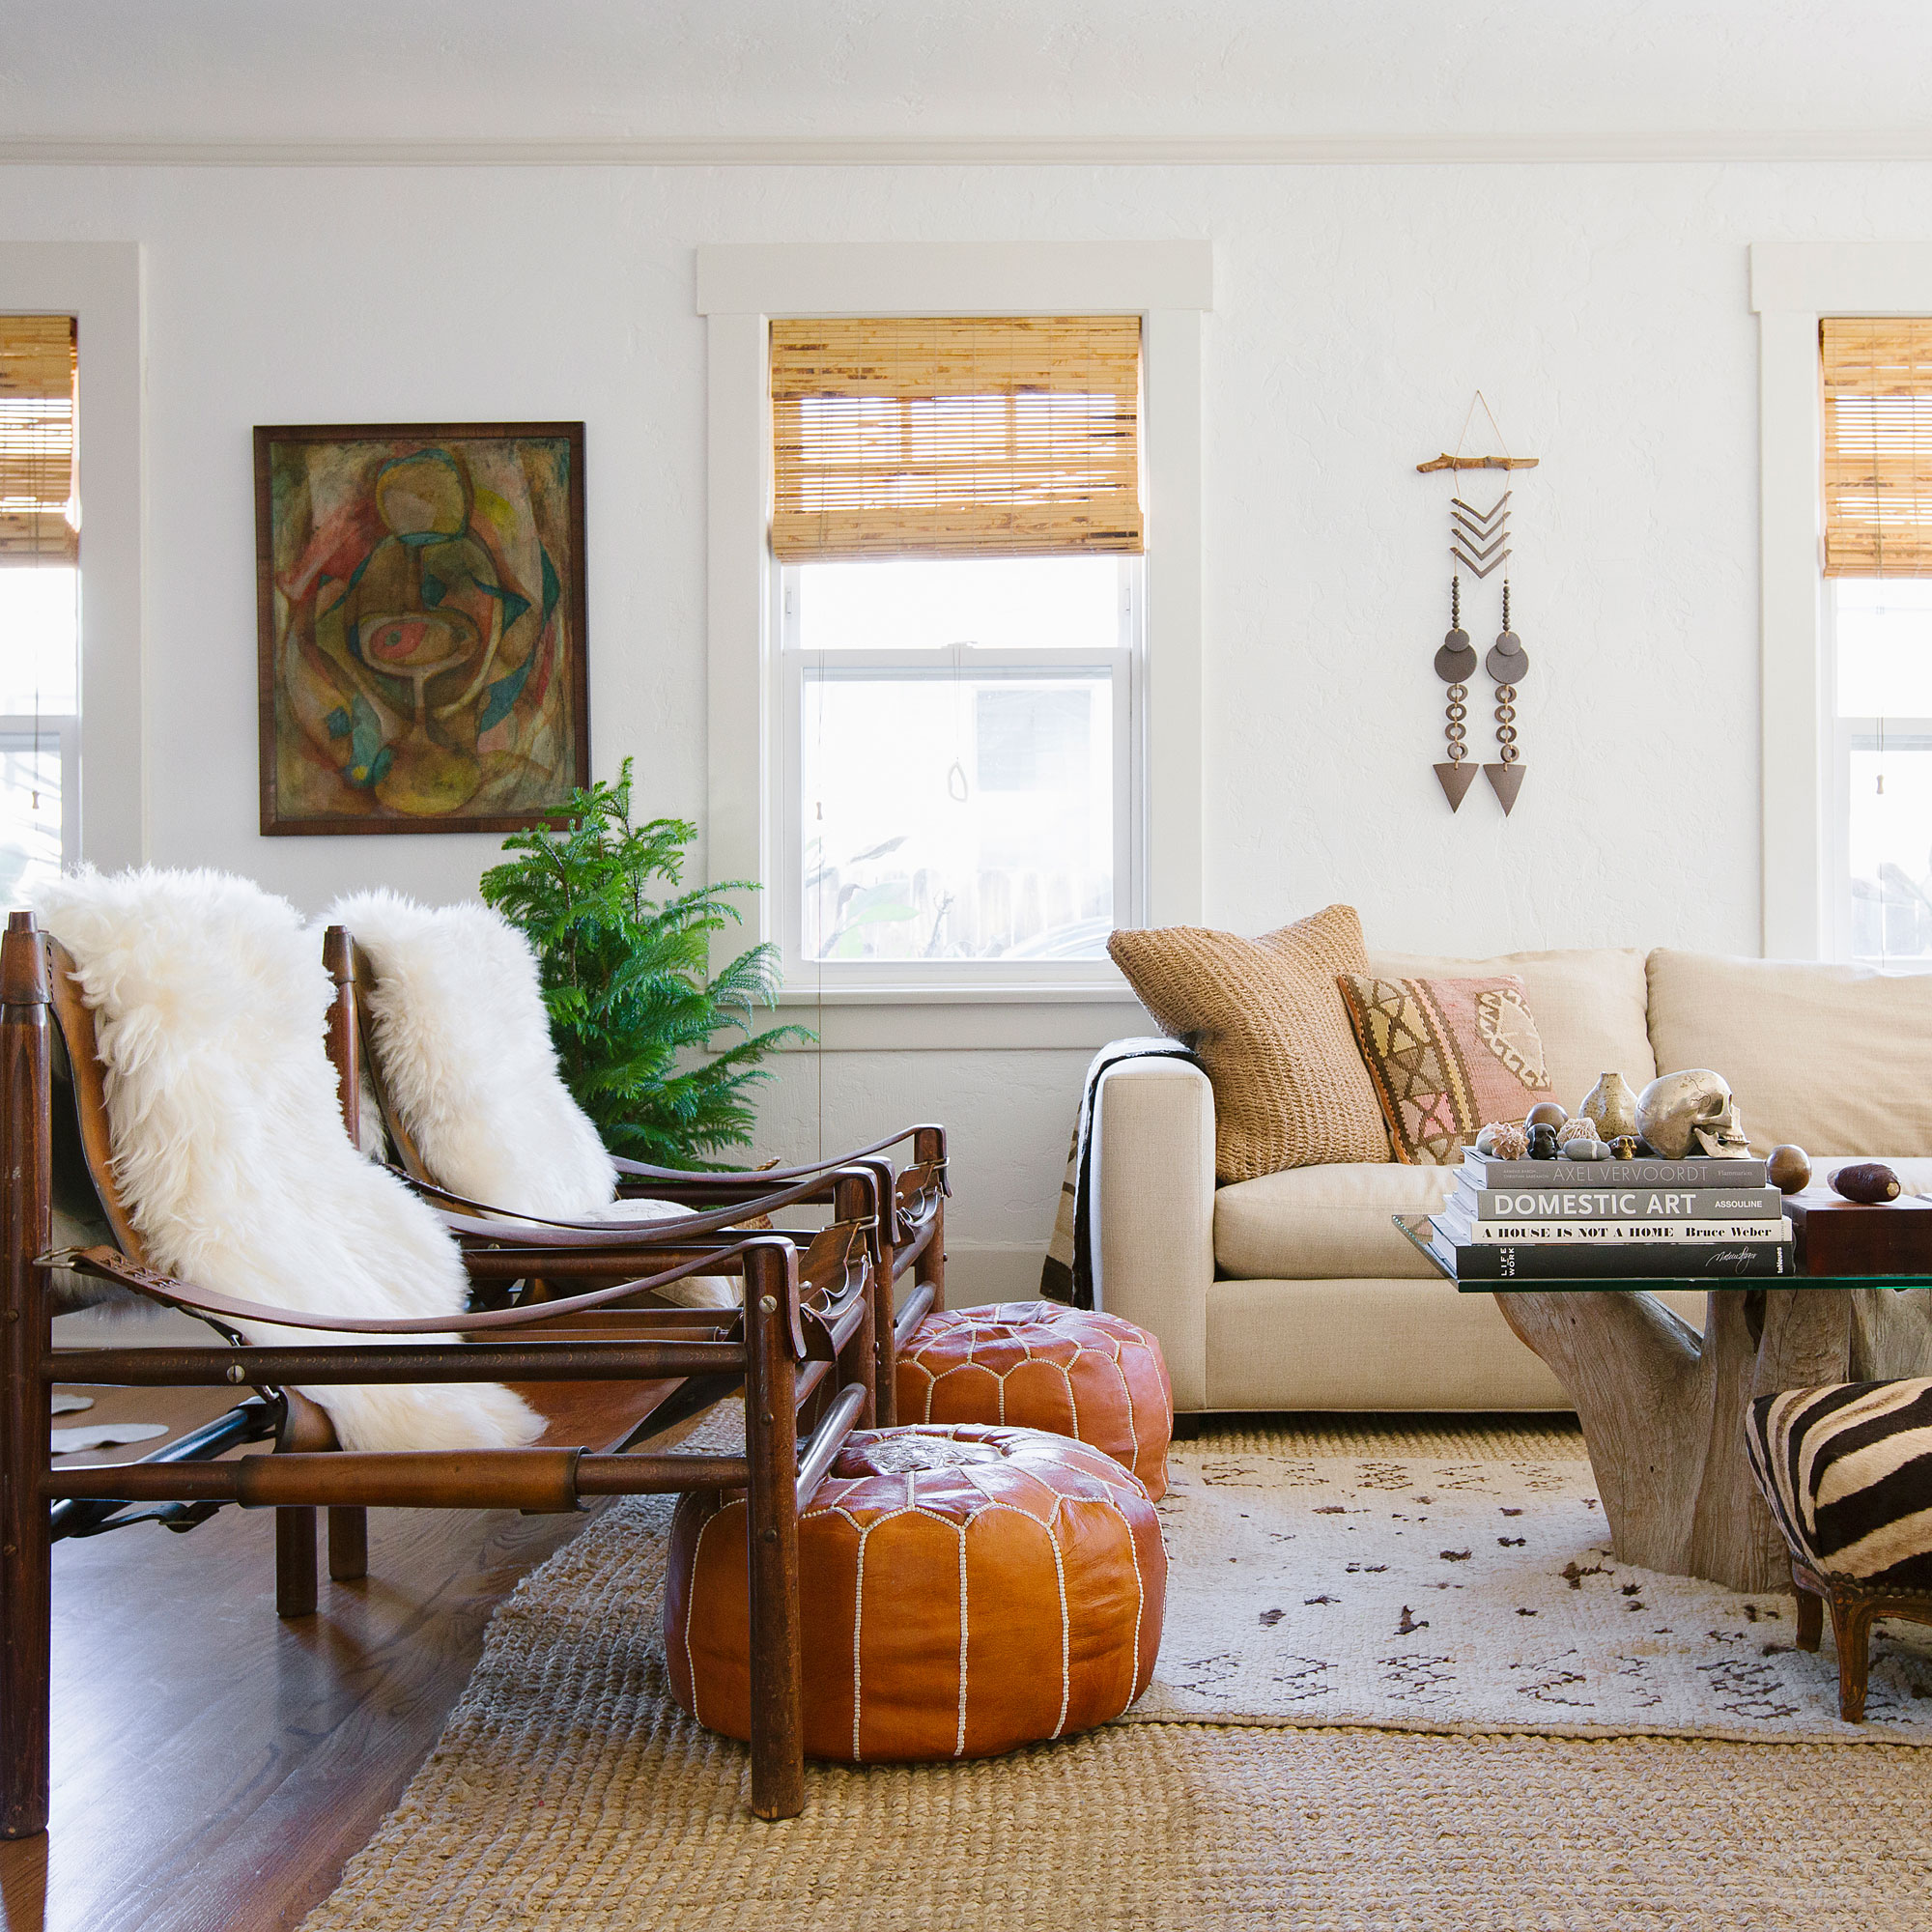 15 Ways to Decorate with Neutrals